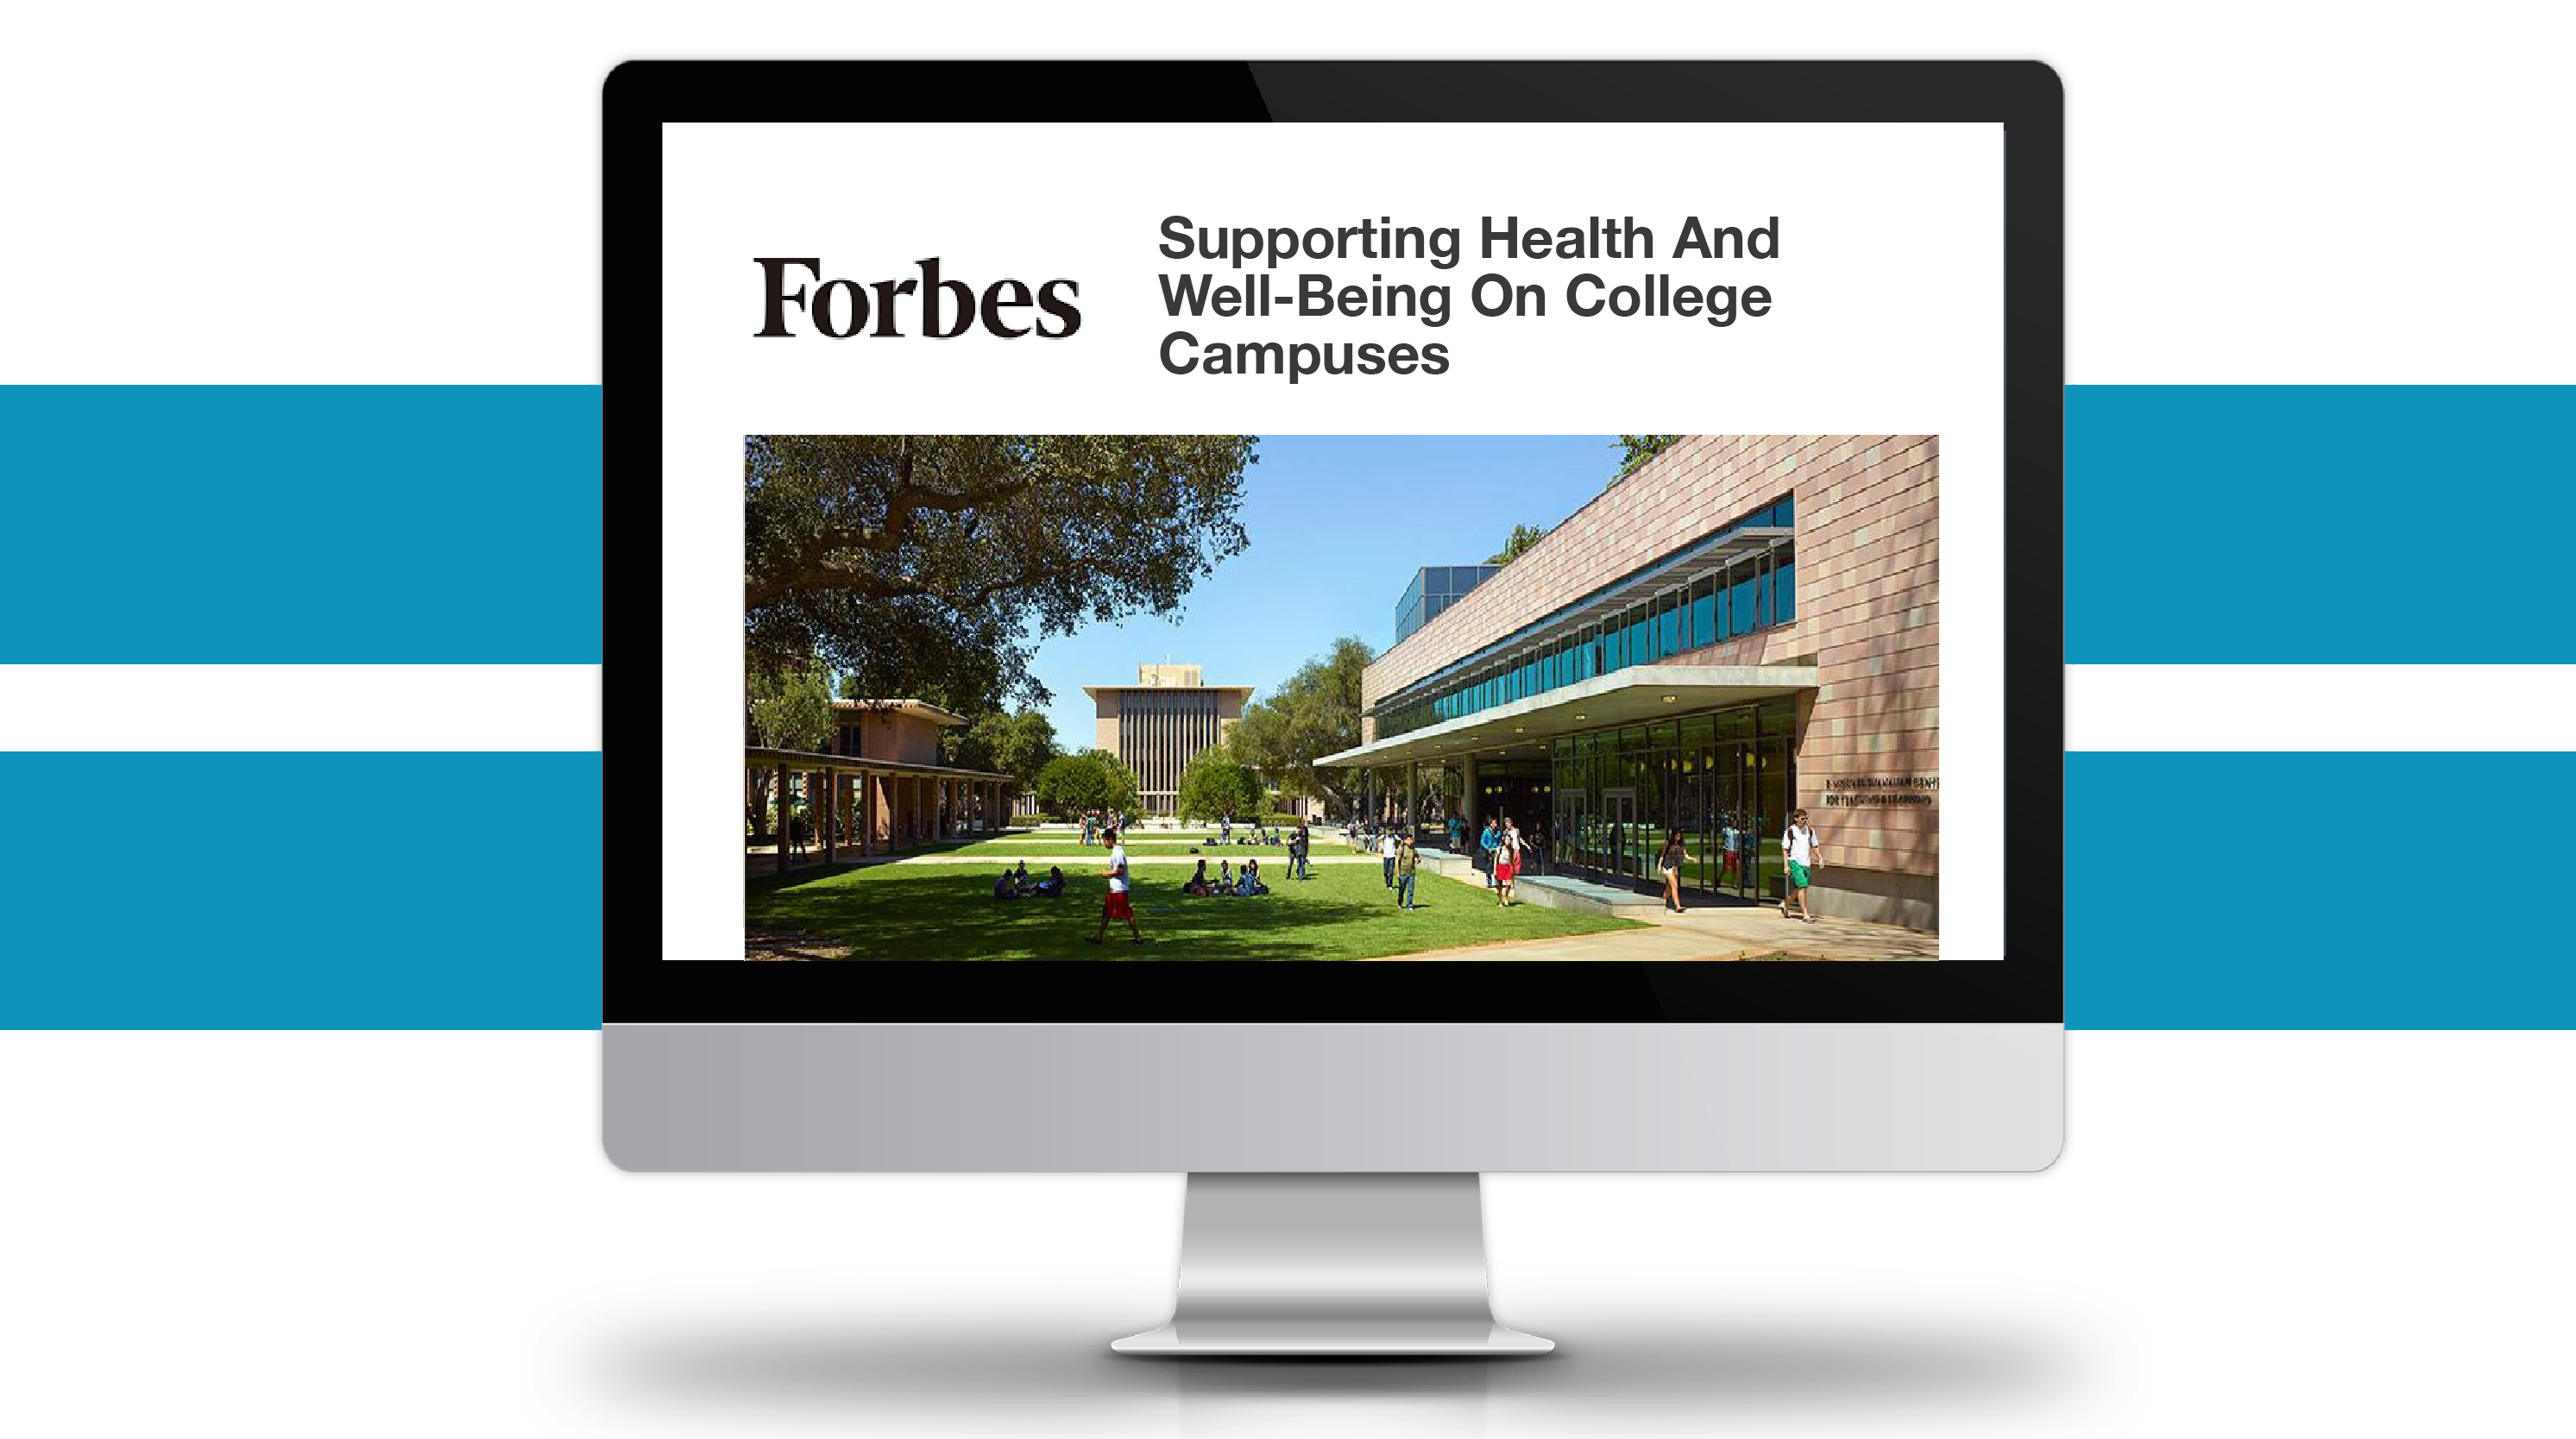 Kognito Implementation at Harvey Mudd College Featured in Forbes